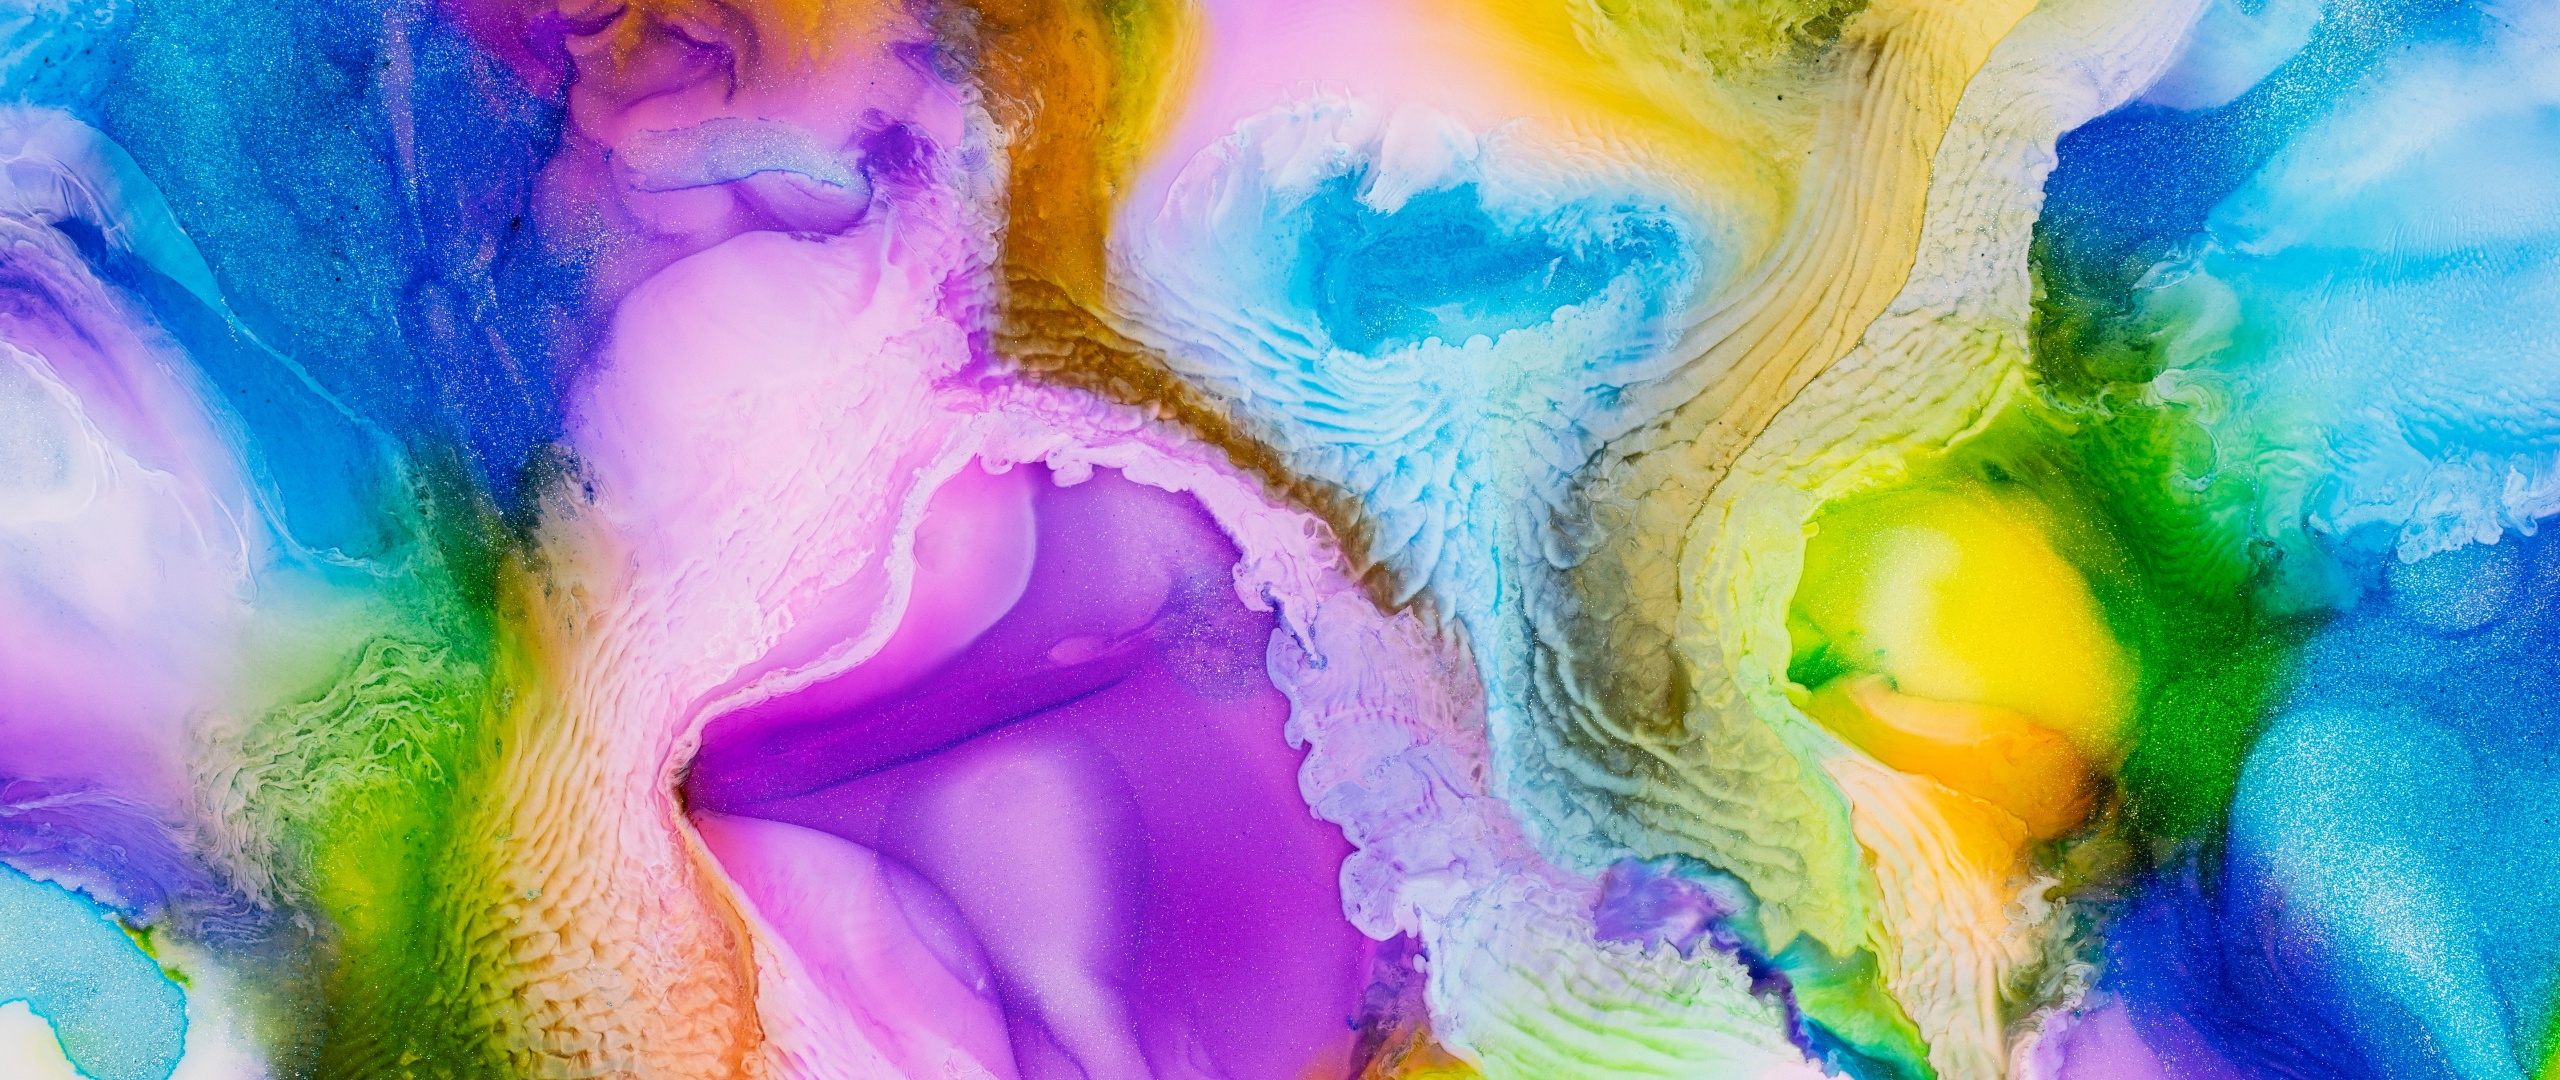 Liquid art Wallpaper 4K, Pearl ink, Colorful, Abstract, #1299